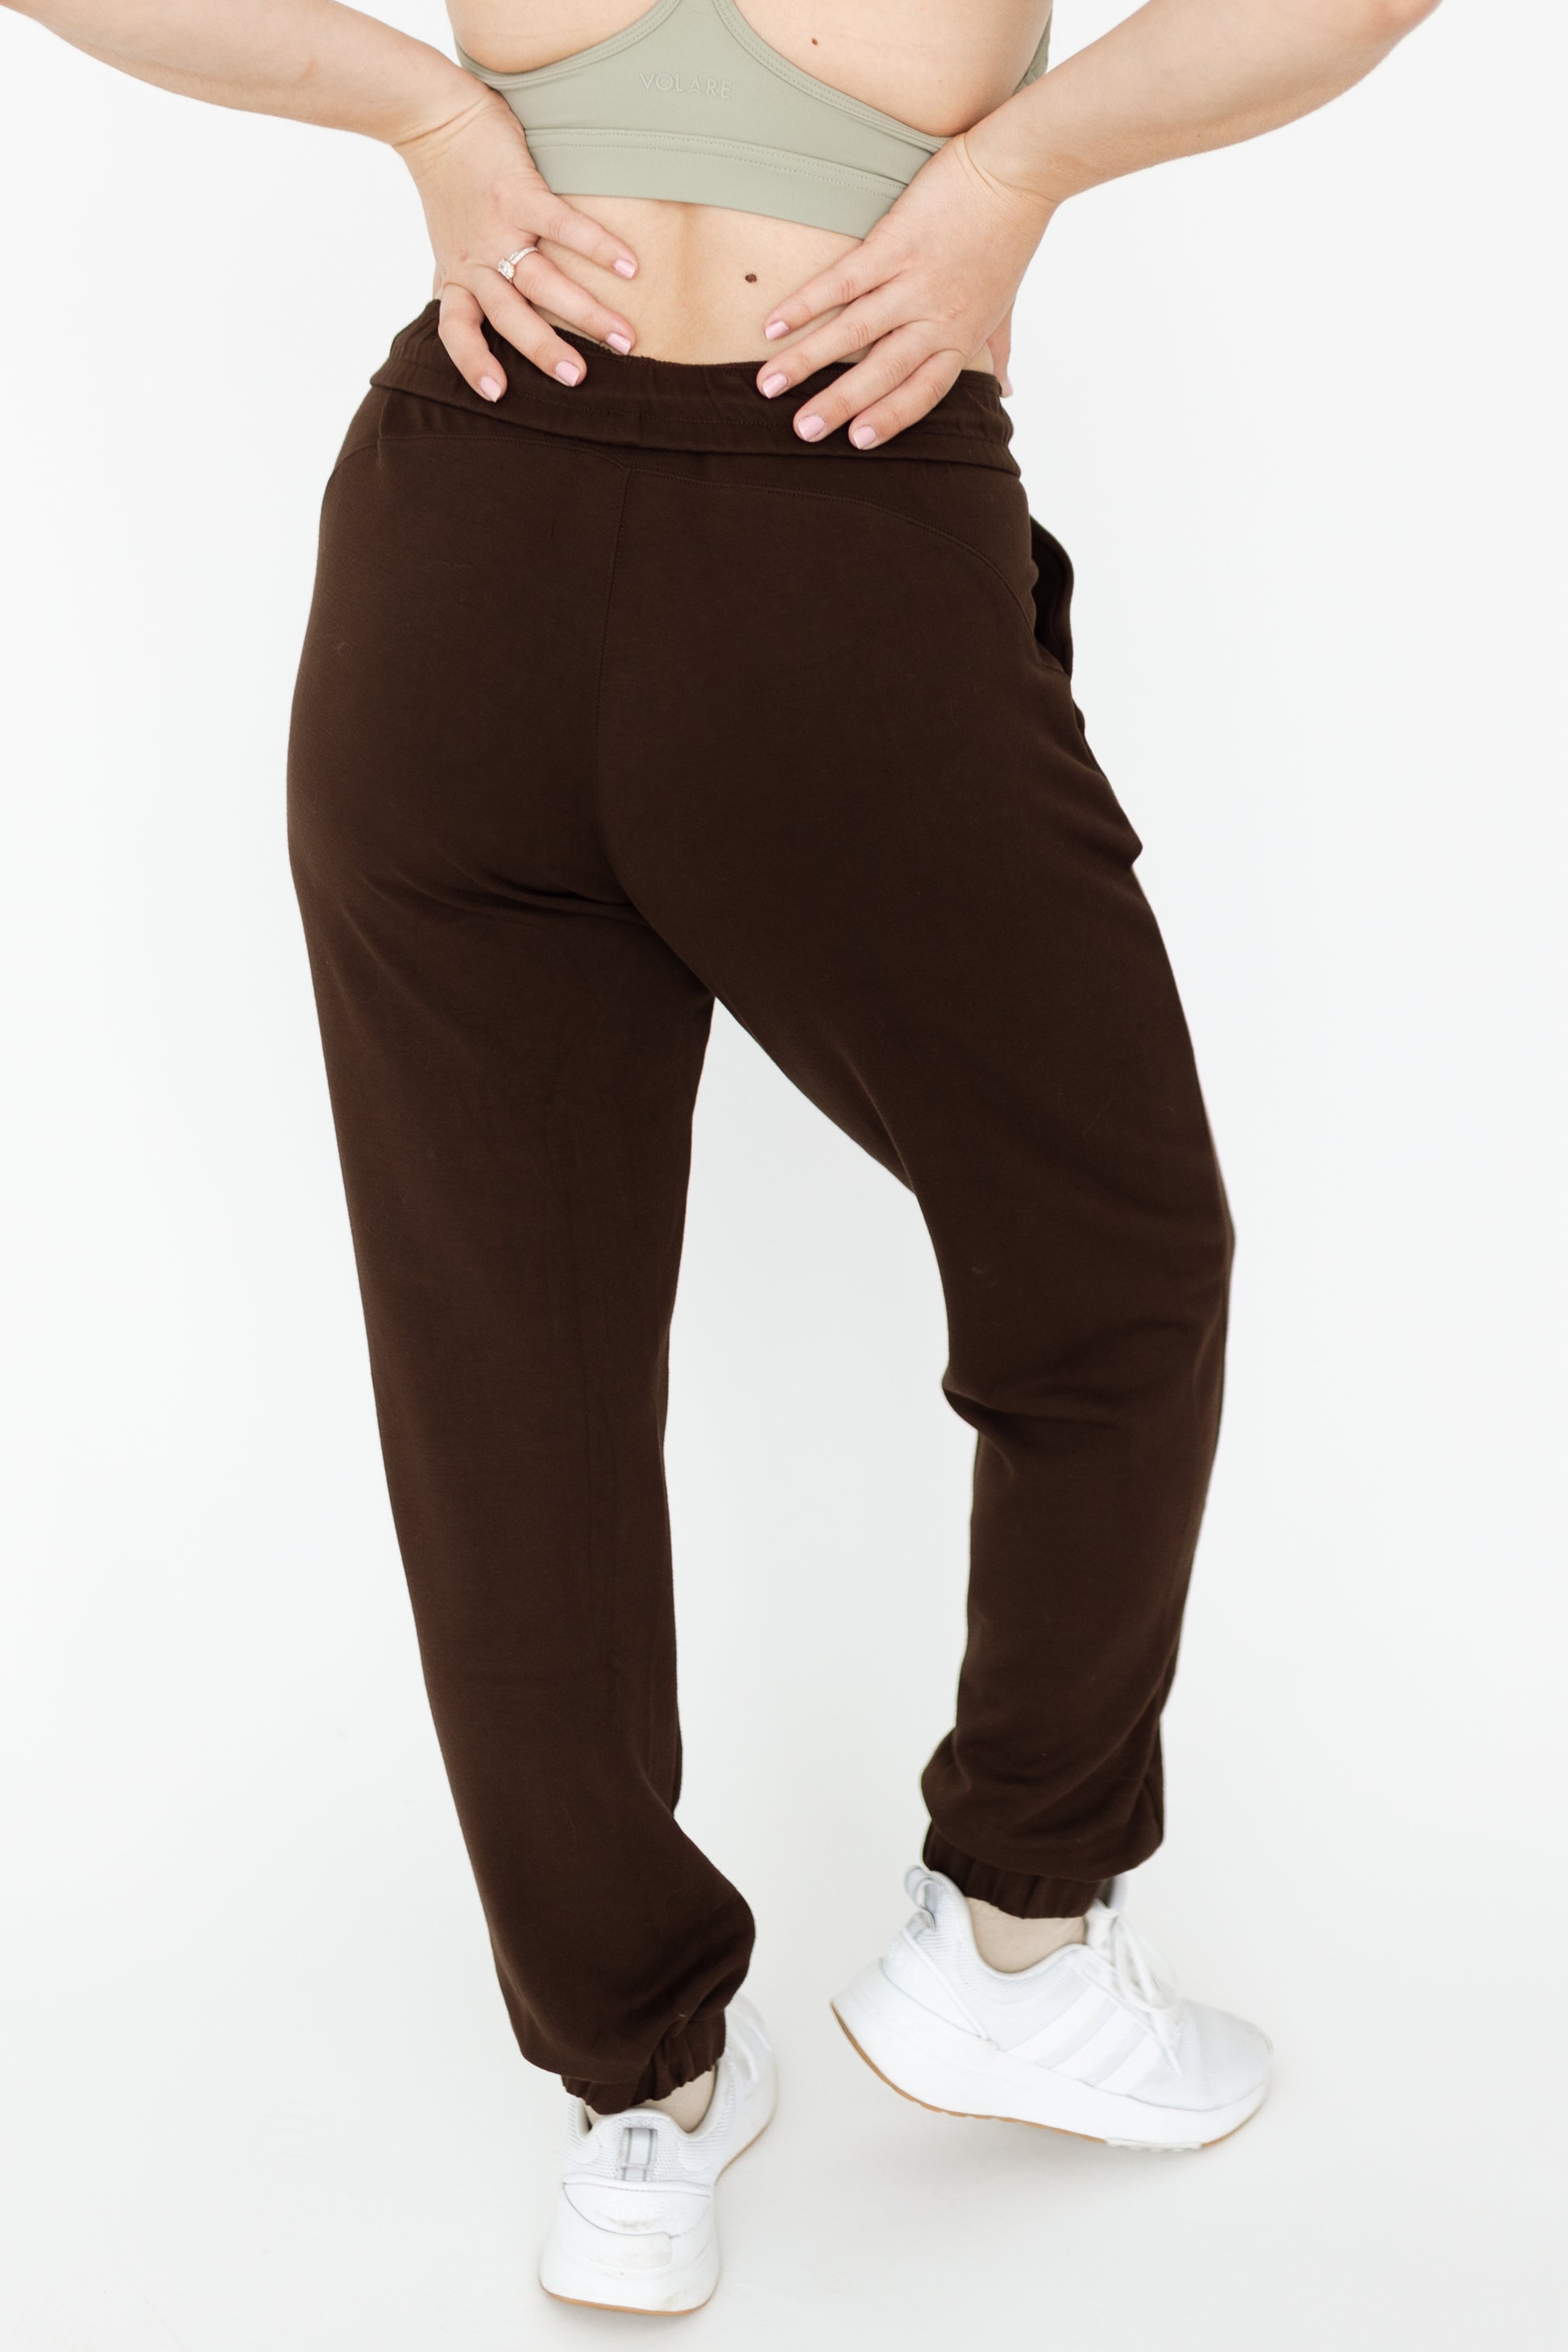 Cocoa Brown Joggers with Elastic Ankle and flattering booty